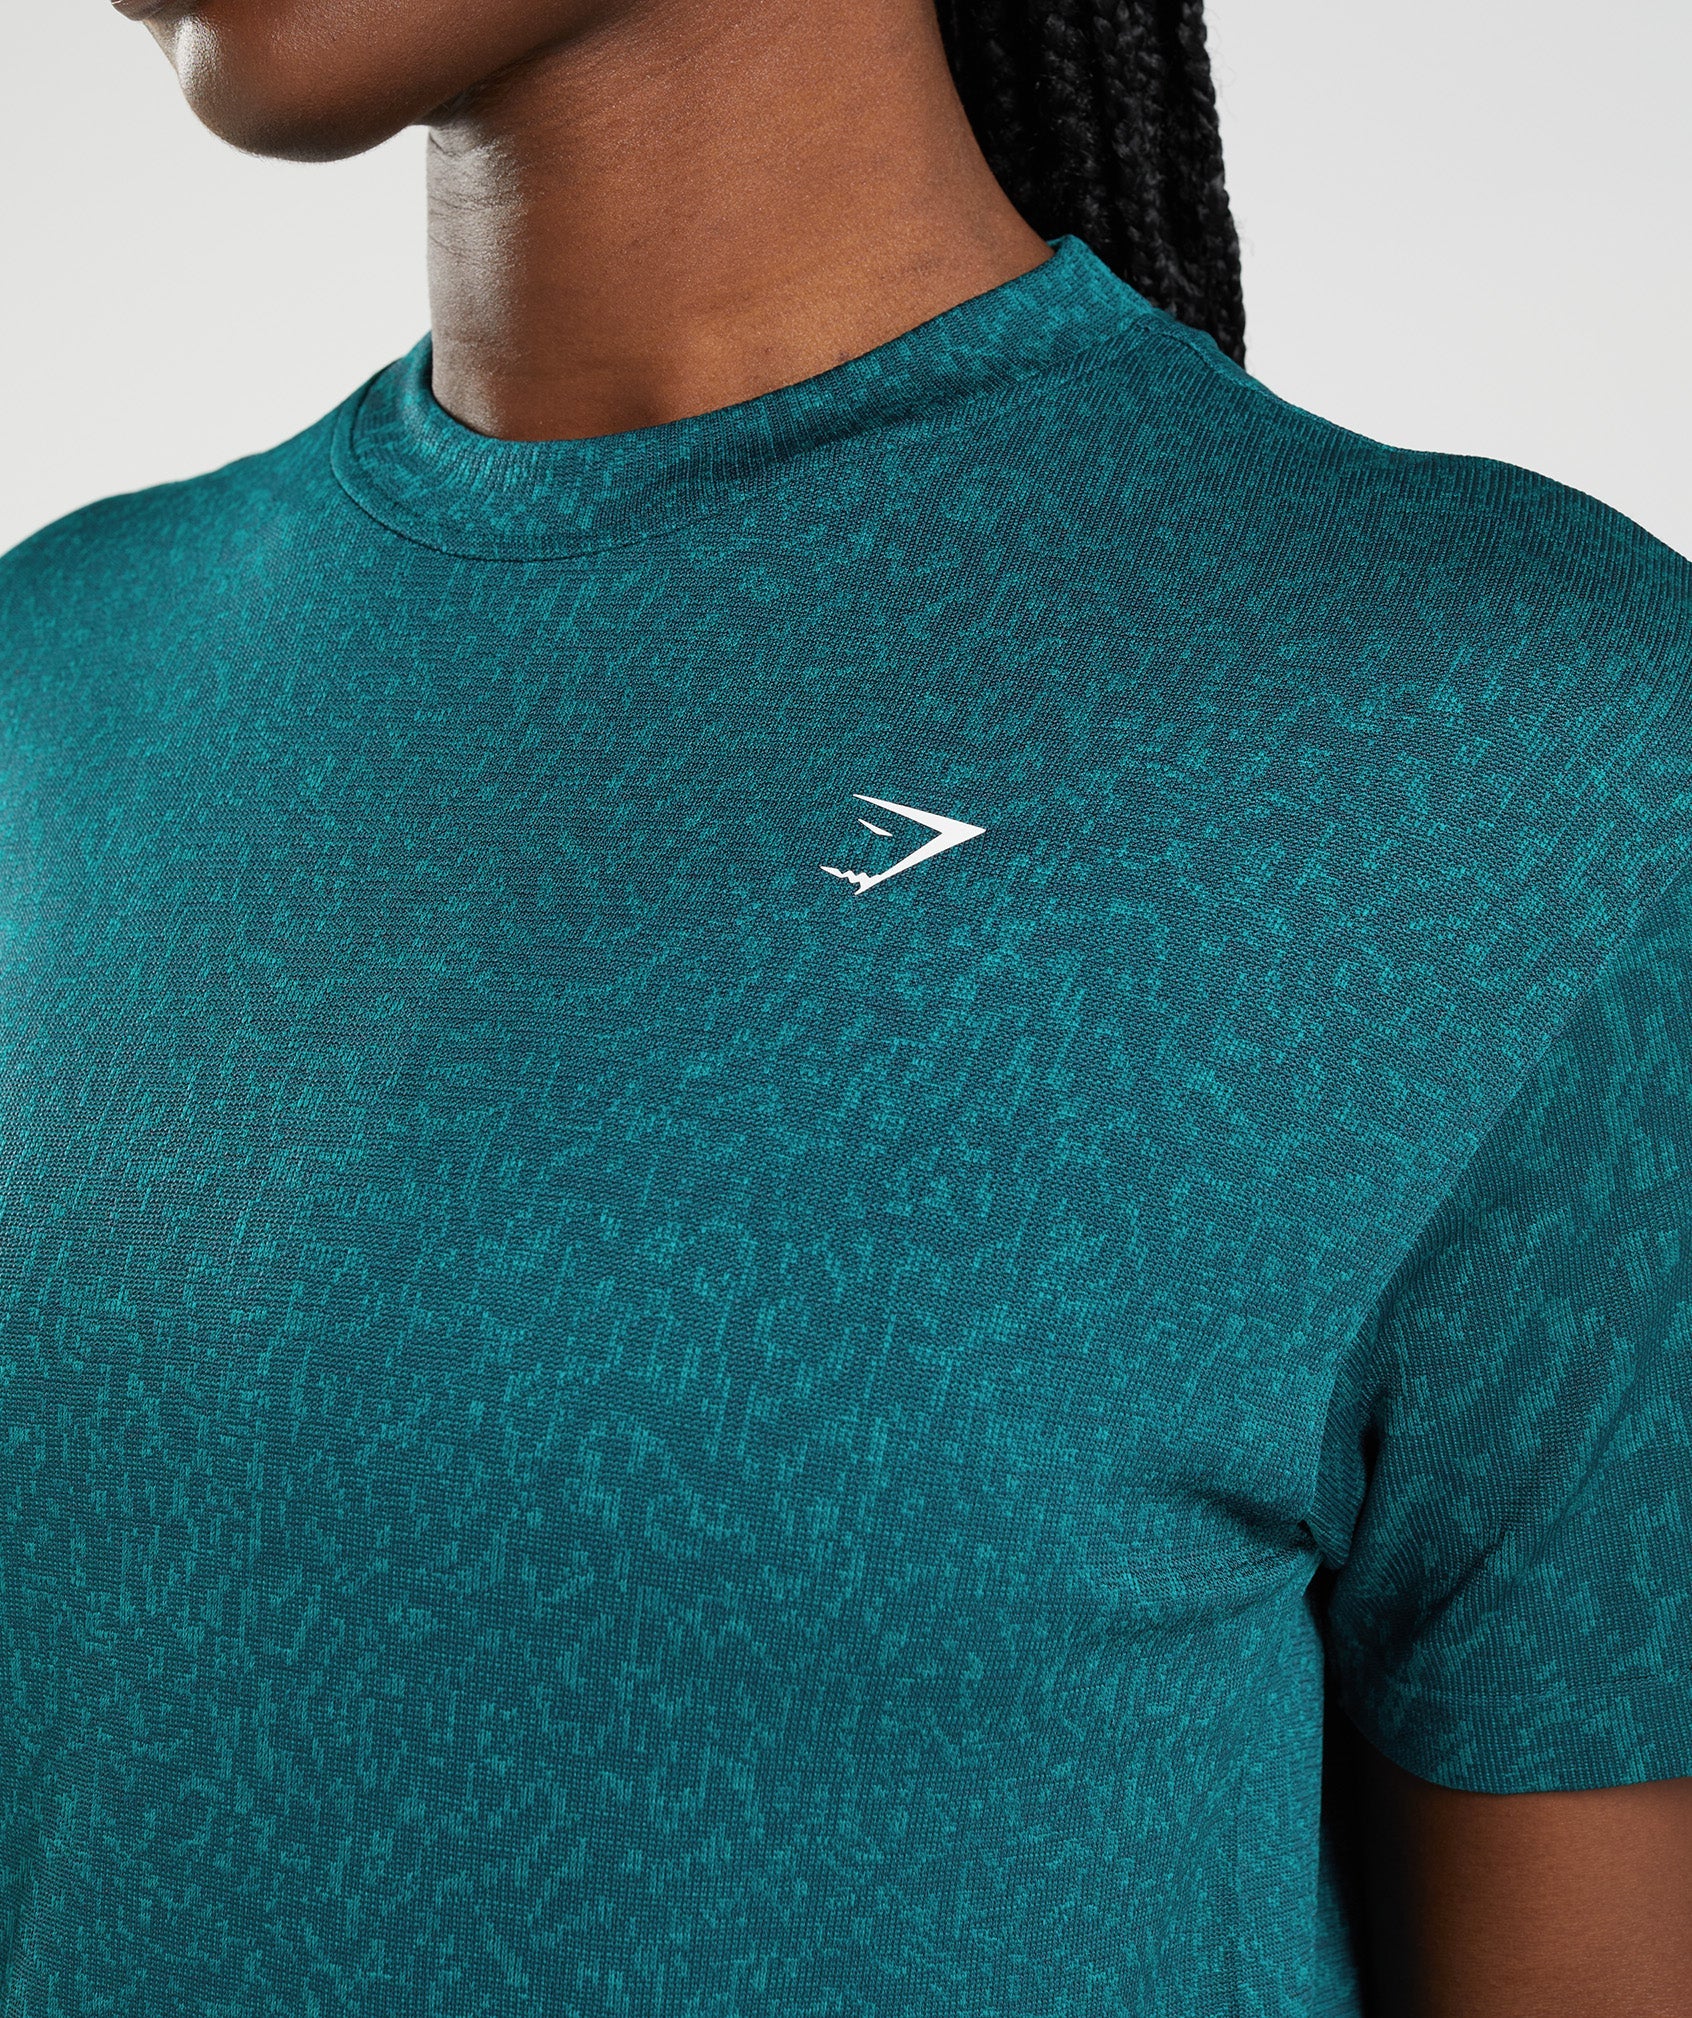 Adapt Animal Seamless T-Shirt in Reef | Winter Teal - view 5